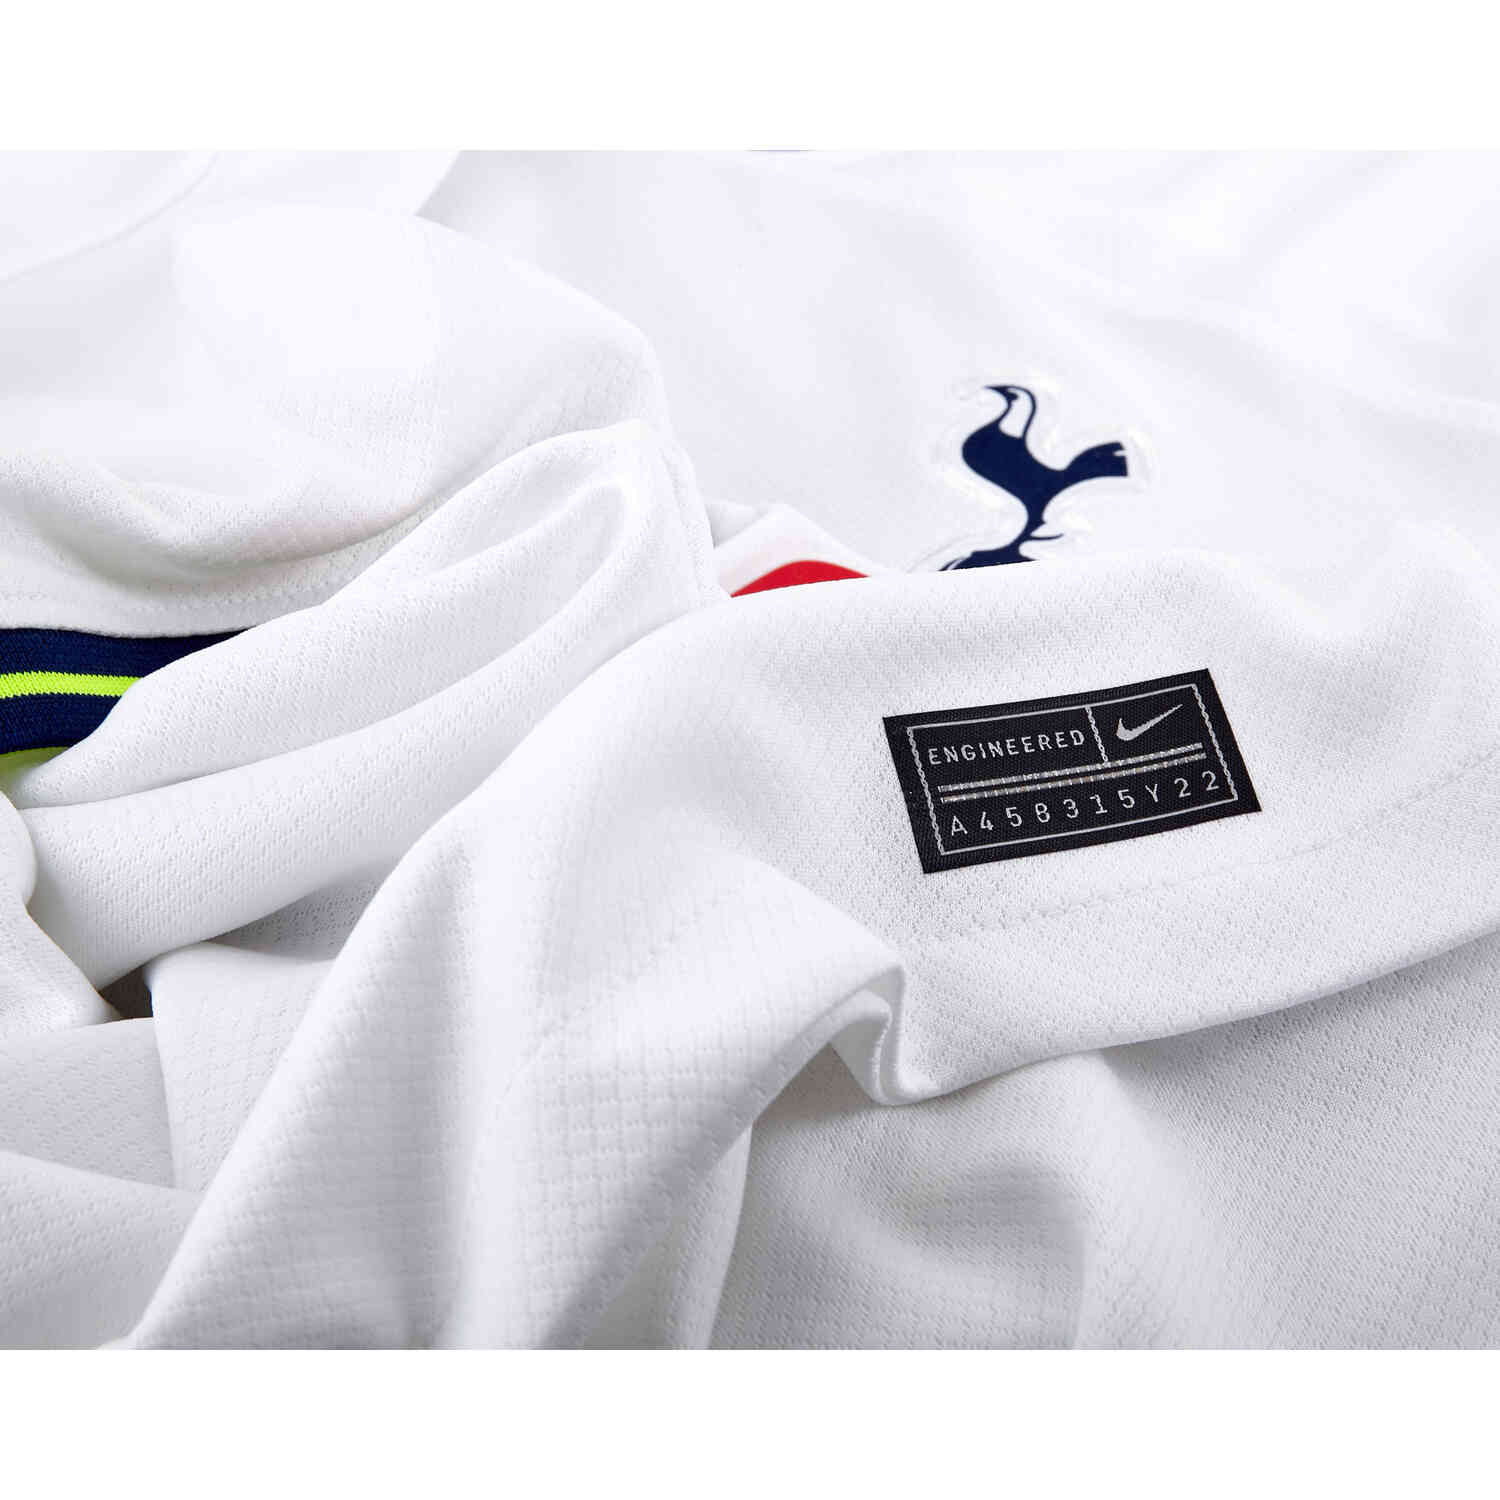 Harry Kane Tottenham 22/23 Authentic Home Jersey by Nike – Arena Jerseys